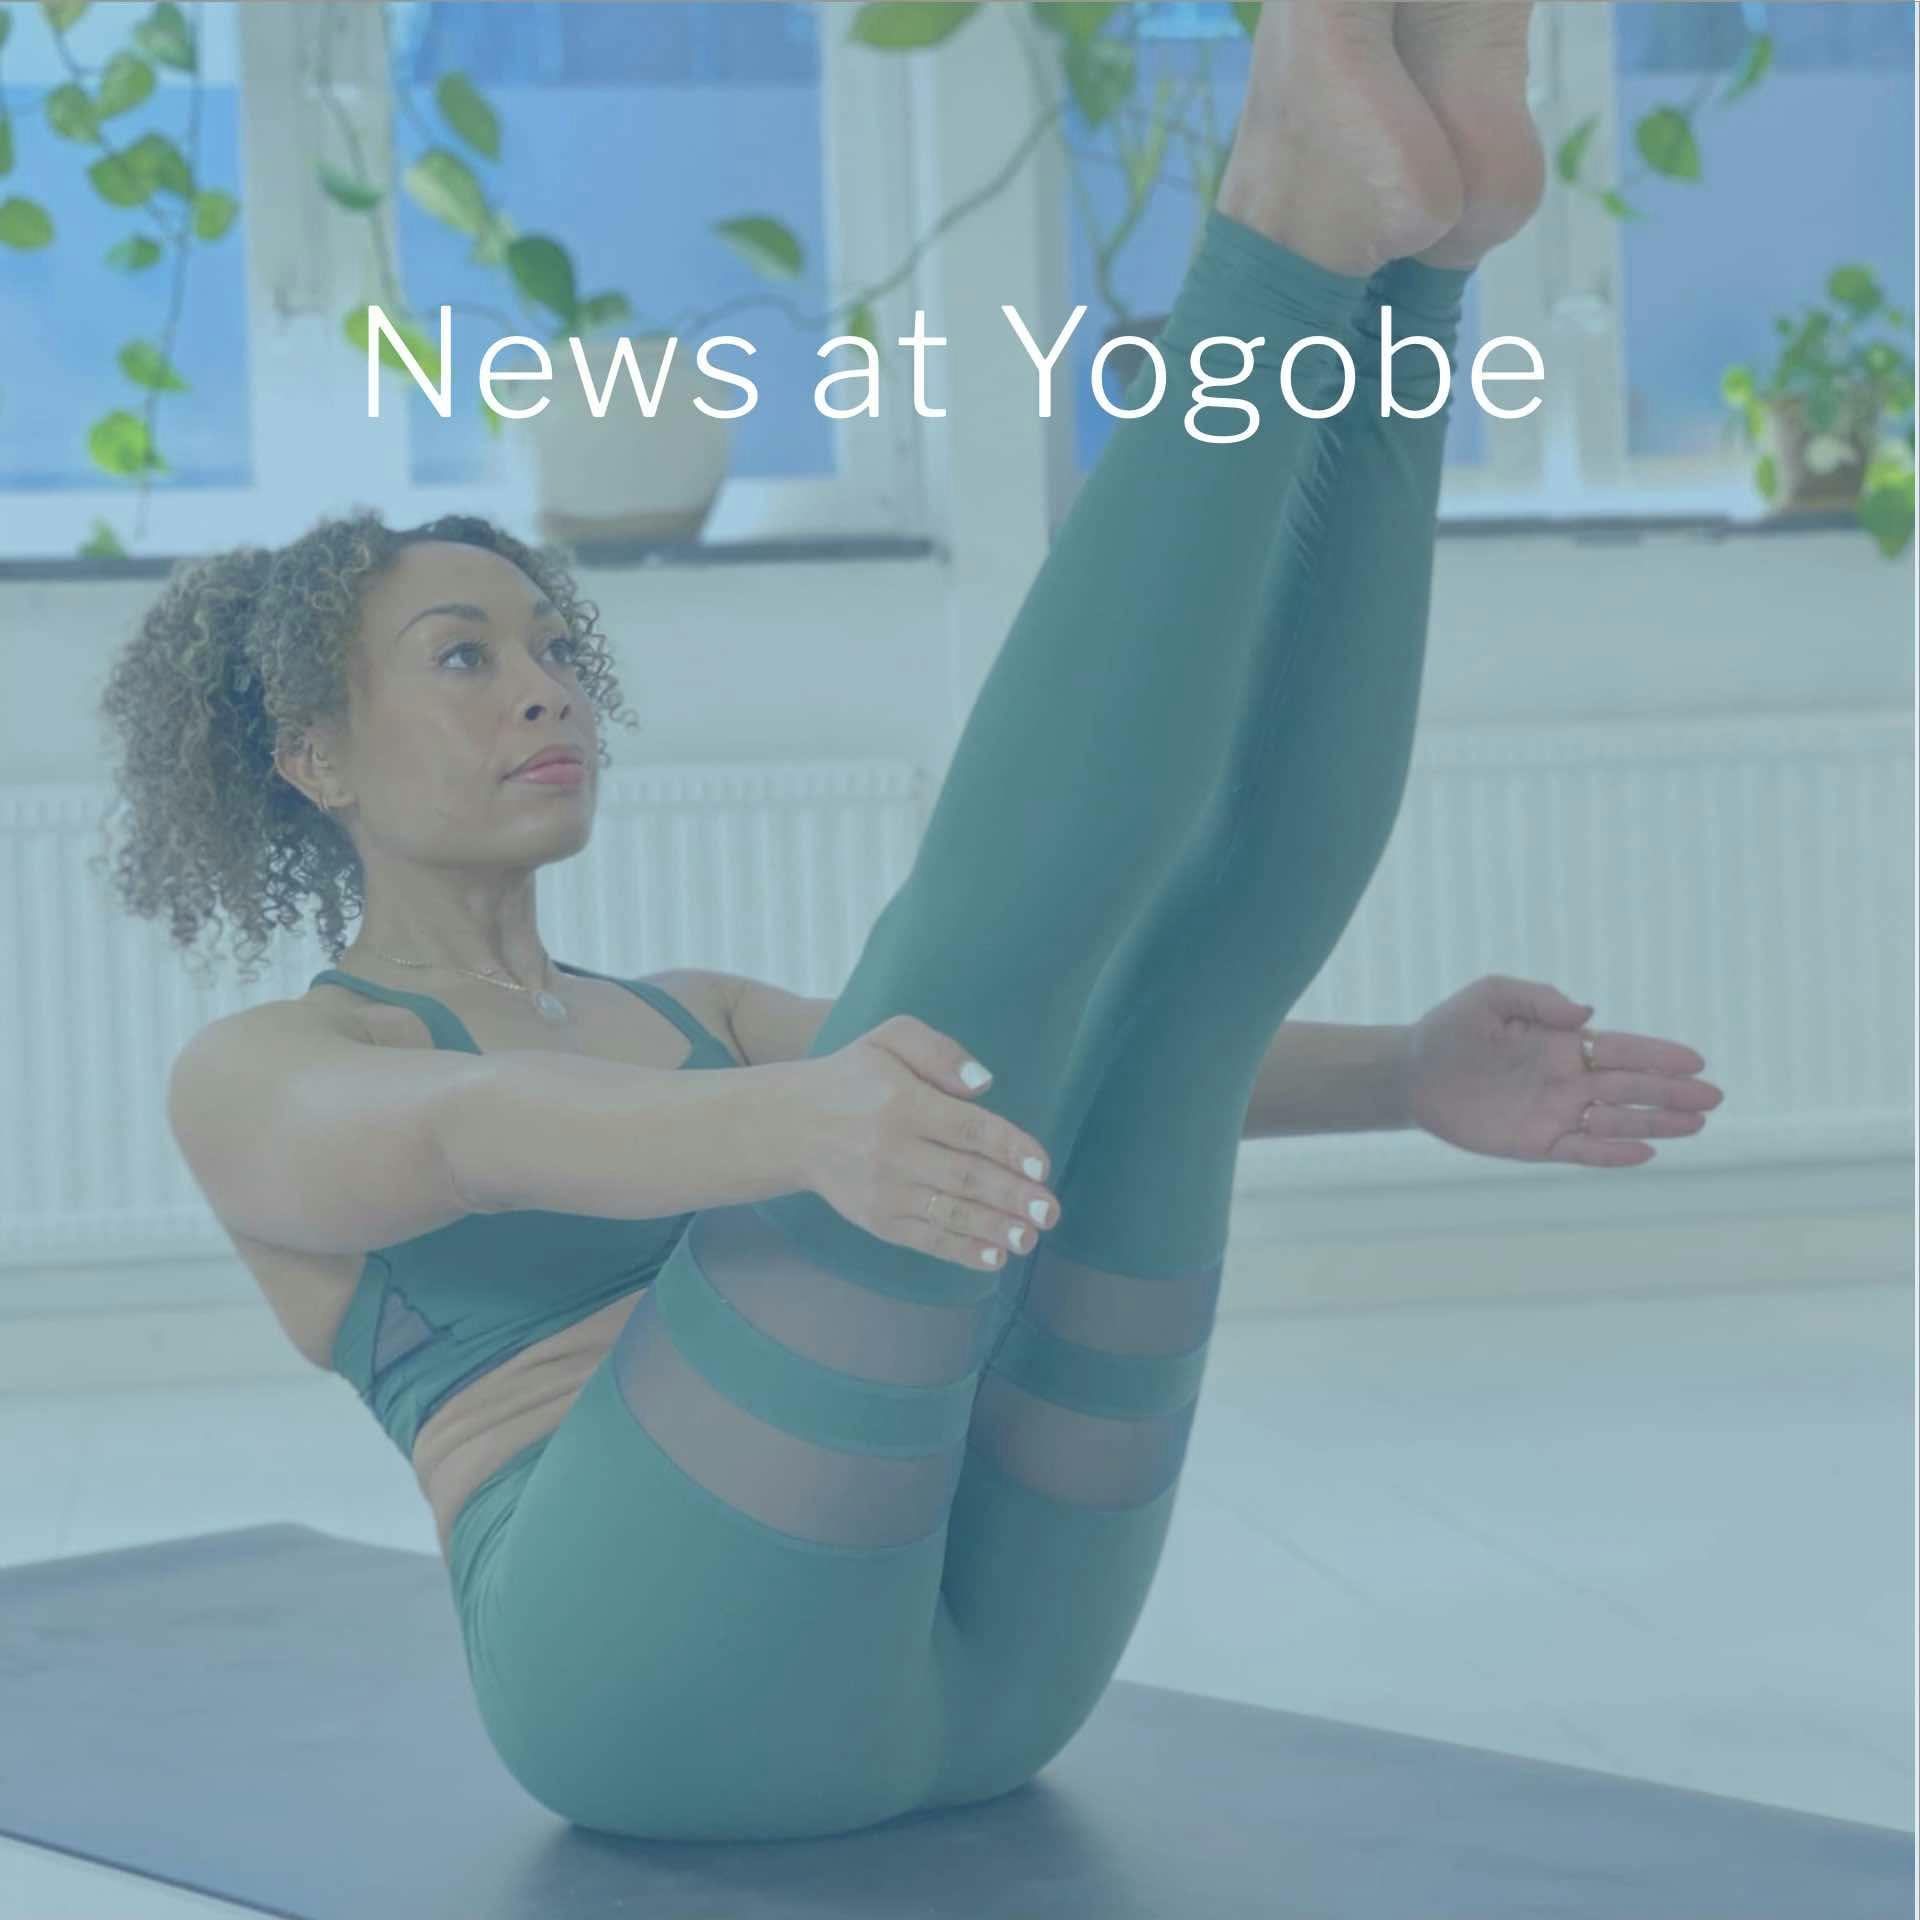 Check out our latest releases at Yogobe - videos, playlists & program within yoga, meditation, fitness and relaxation.